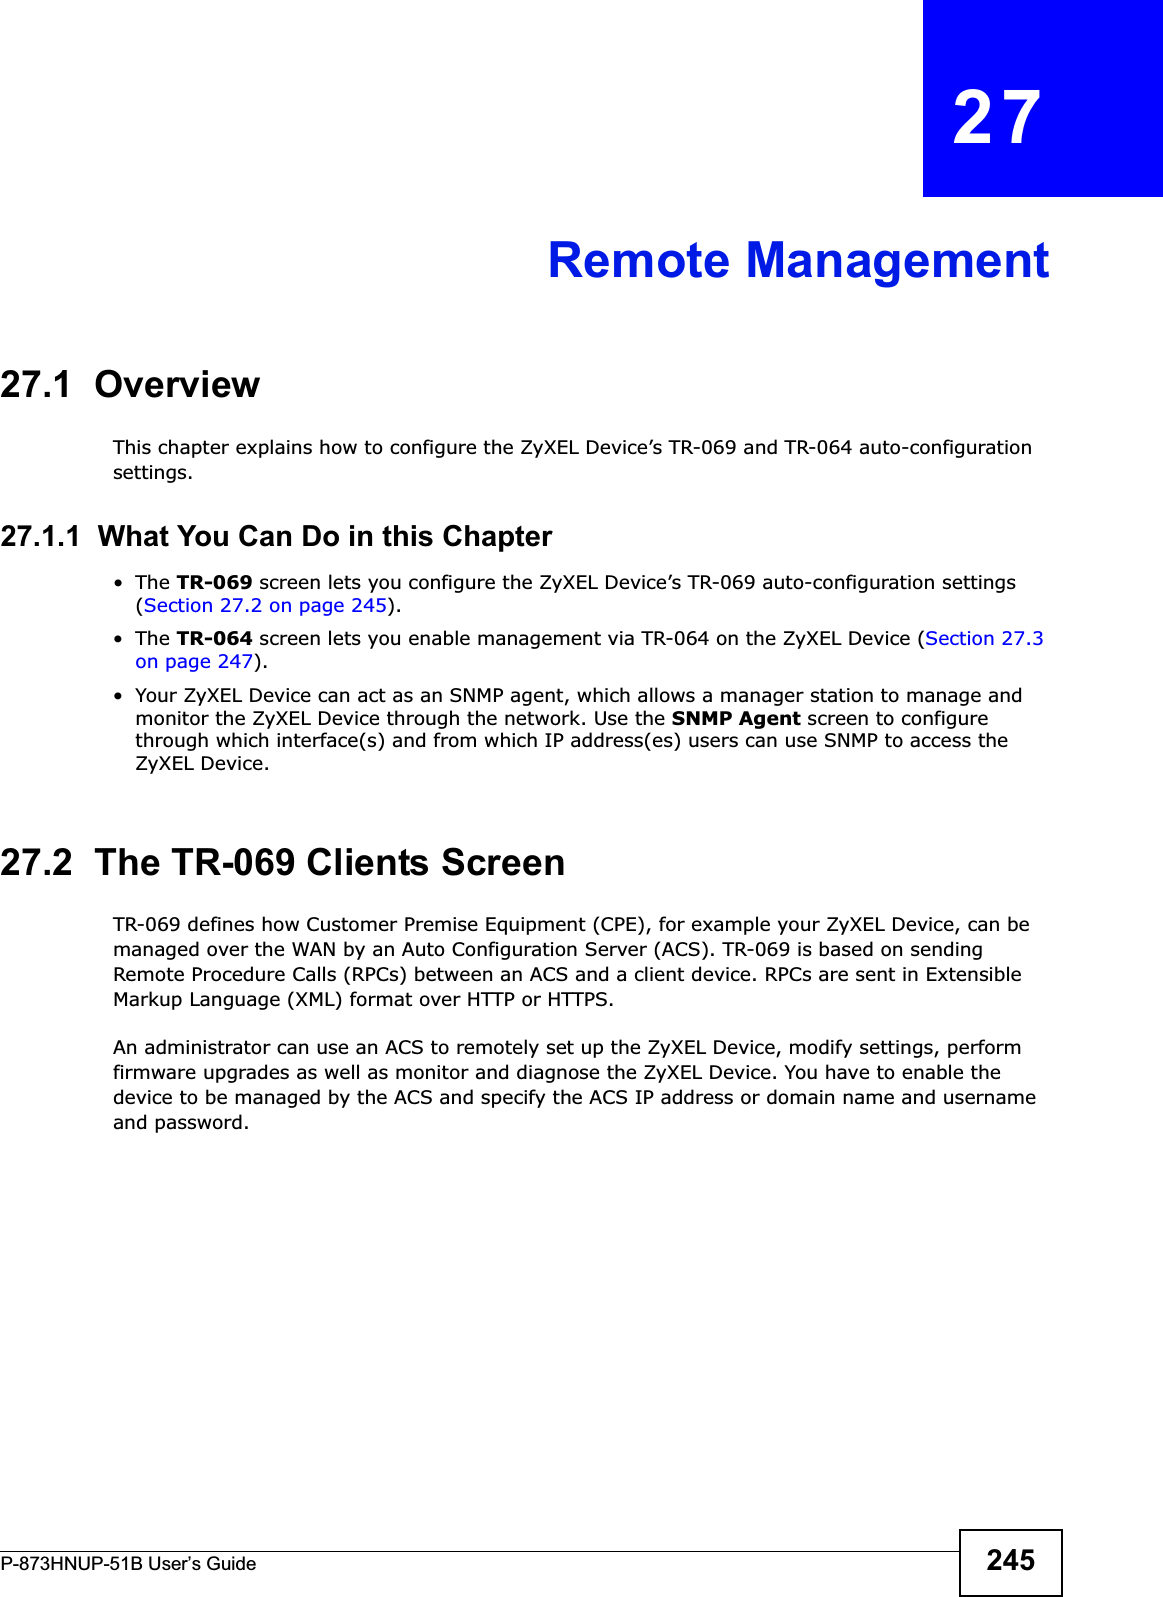 P-873HNUP-51B User’s Guide 245CHAPTER   27Remote Management27.1  OverviewThis chapter explains how to configure the ZyXEL Device’s TR-069 and TR-064 auto-configuration settings.27.1.1  What You Can Do in this Chapter•The TR-069 screen lets you configure the ZyXEL Device’s TR-069 auto-configuration settings (Section 27.2 on page 245).•The TR-064 screen lets you enable management via TR-064 on the ZyXEL Device (Section 27.3 on page 247).• Your ZyXEL Device can act as an SNMP agent, which allows a manager station to manage and monitor the ZyXEL Device through the network. Use the SNMP Agent screen to configure through which interface(s) and from which IP address(es) users can use SNMP to access the ZyXEL Device.27.2  The TR-069 Clients ScreenTR-069 defines how Customer Premise Equipment (CPE), for example your ZyXEL Device, can be managed over the WAN by an Auto Configuration Server (ACS). TR-069 is based on sending Remote Procedure Calls (RPCs) between an ACS and a client device. RPCs are sent in Extensible Markup Language (XML) format over HTTP or HTTPS. An administrator can use an ACS to remotely set up the ZyXEL Device, modify settings, perform firmware upgrades as well as monitor and diagnose the ZyXEL Device. You have to enable the device to be managed by the ACS and specify the ACS IP address or domain name and username and password.